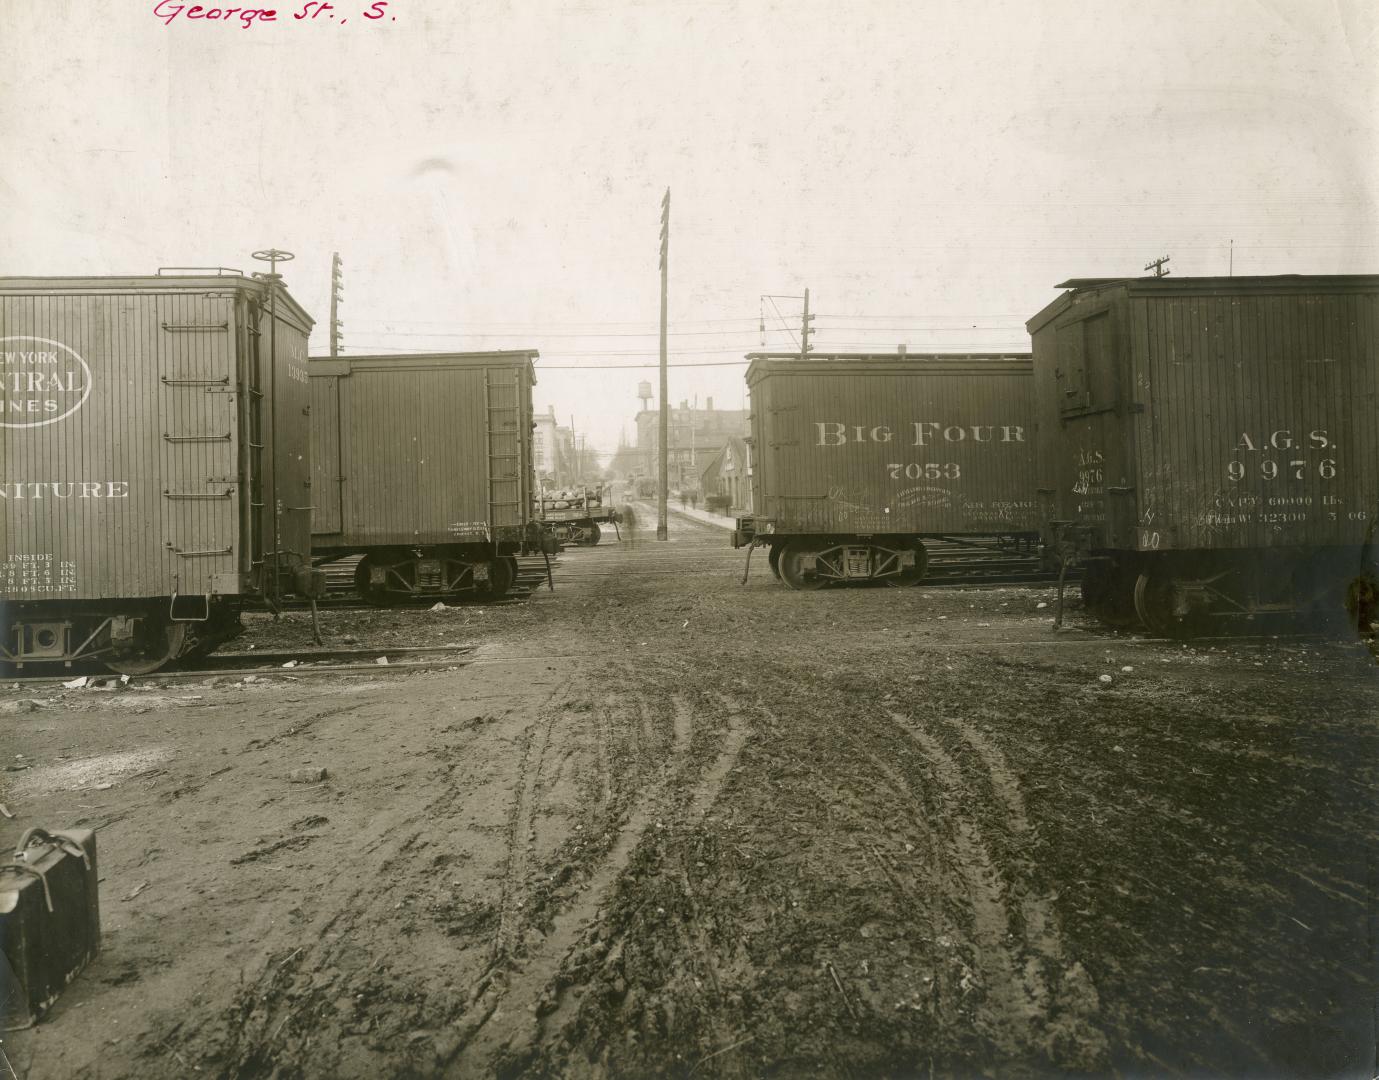 Image shows a street view with a few containers on wheels on both sides.